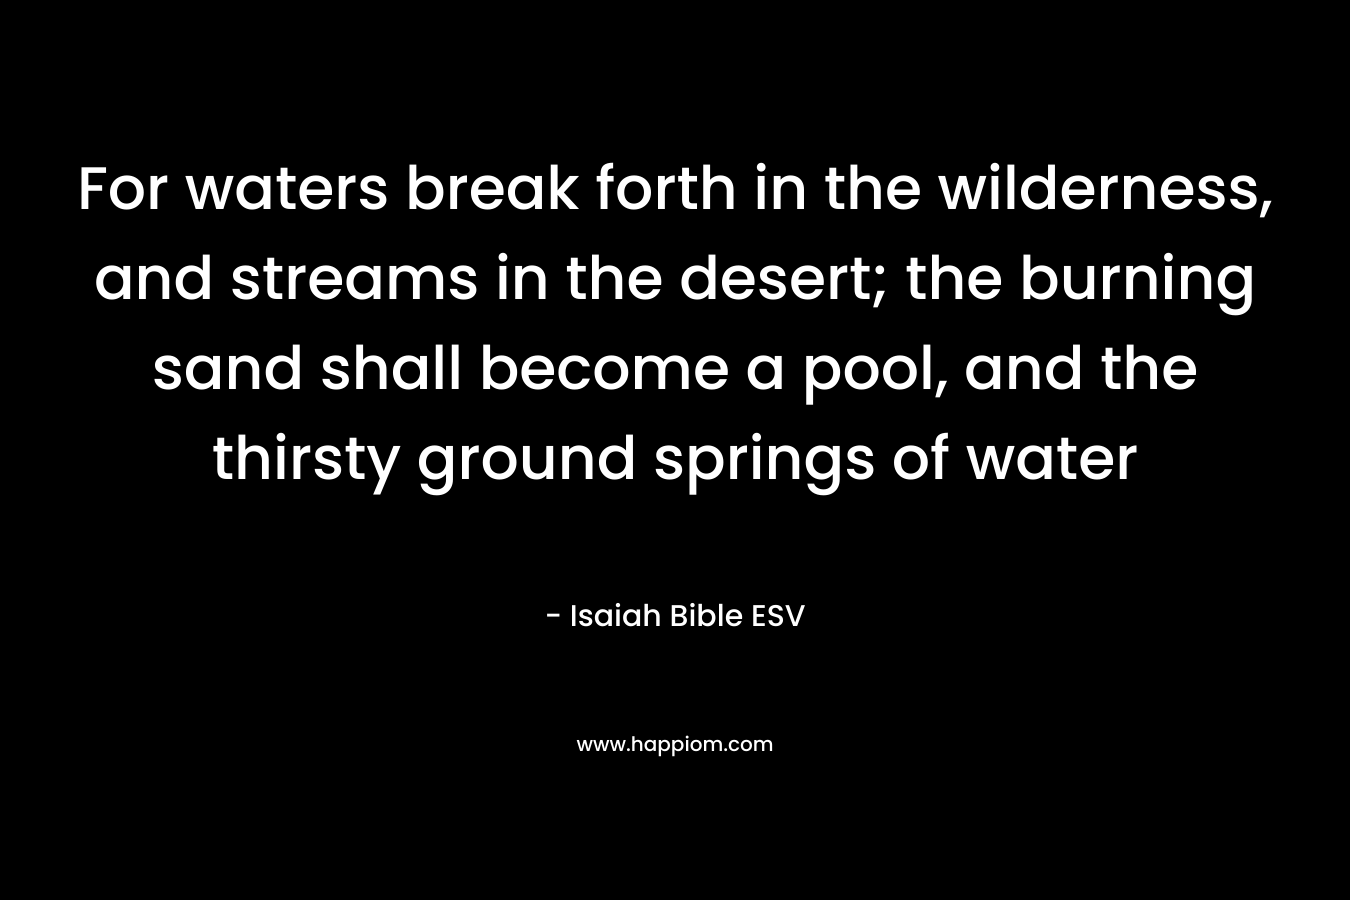 For waters break forth in the wilderness, and streams in the desert; the burning sand shall become a pool, and the thirsty ground springs of water – Isaiah Bible ESV